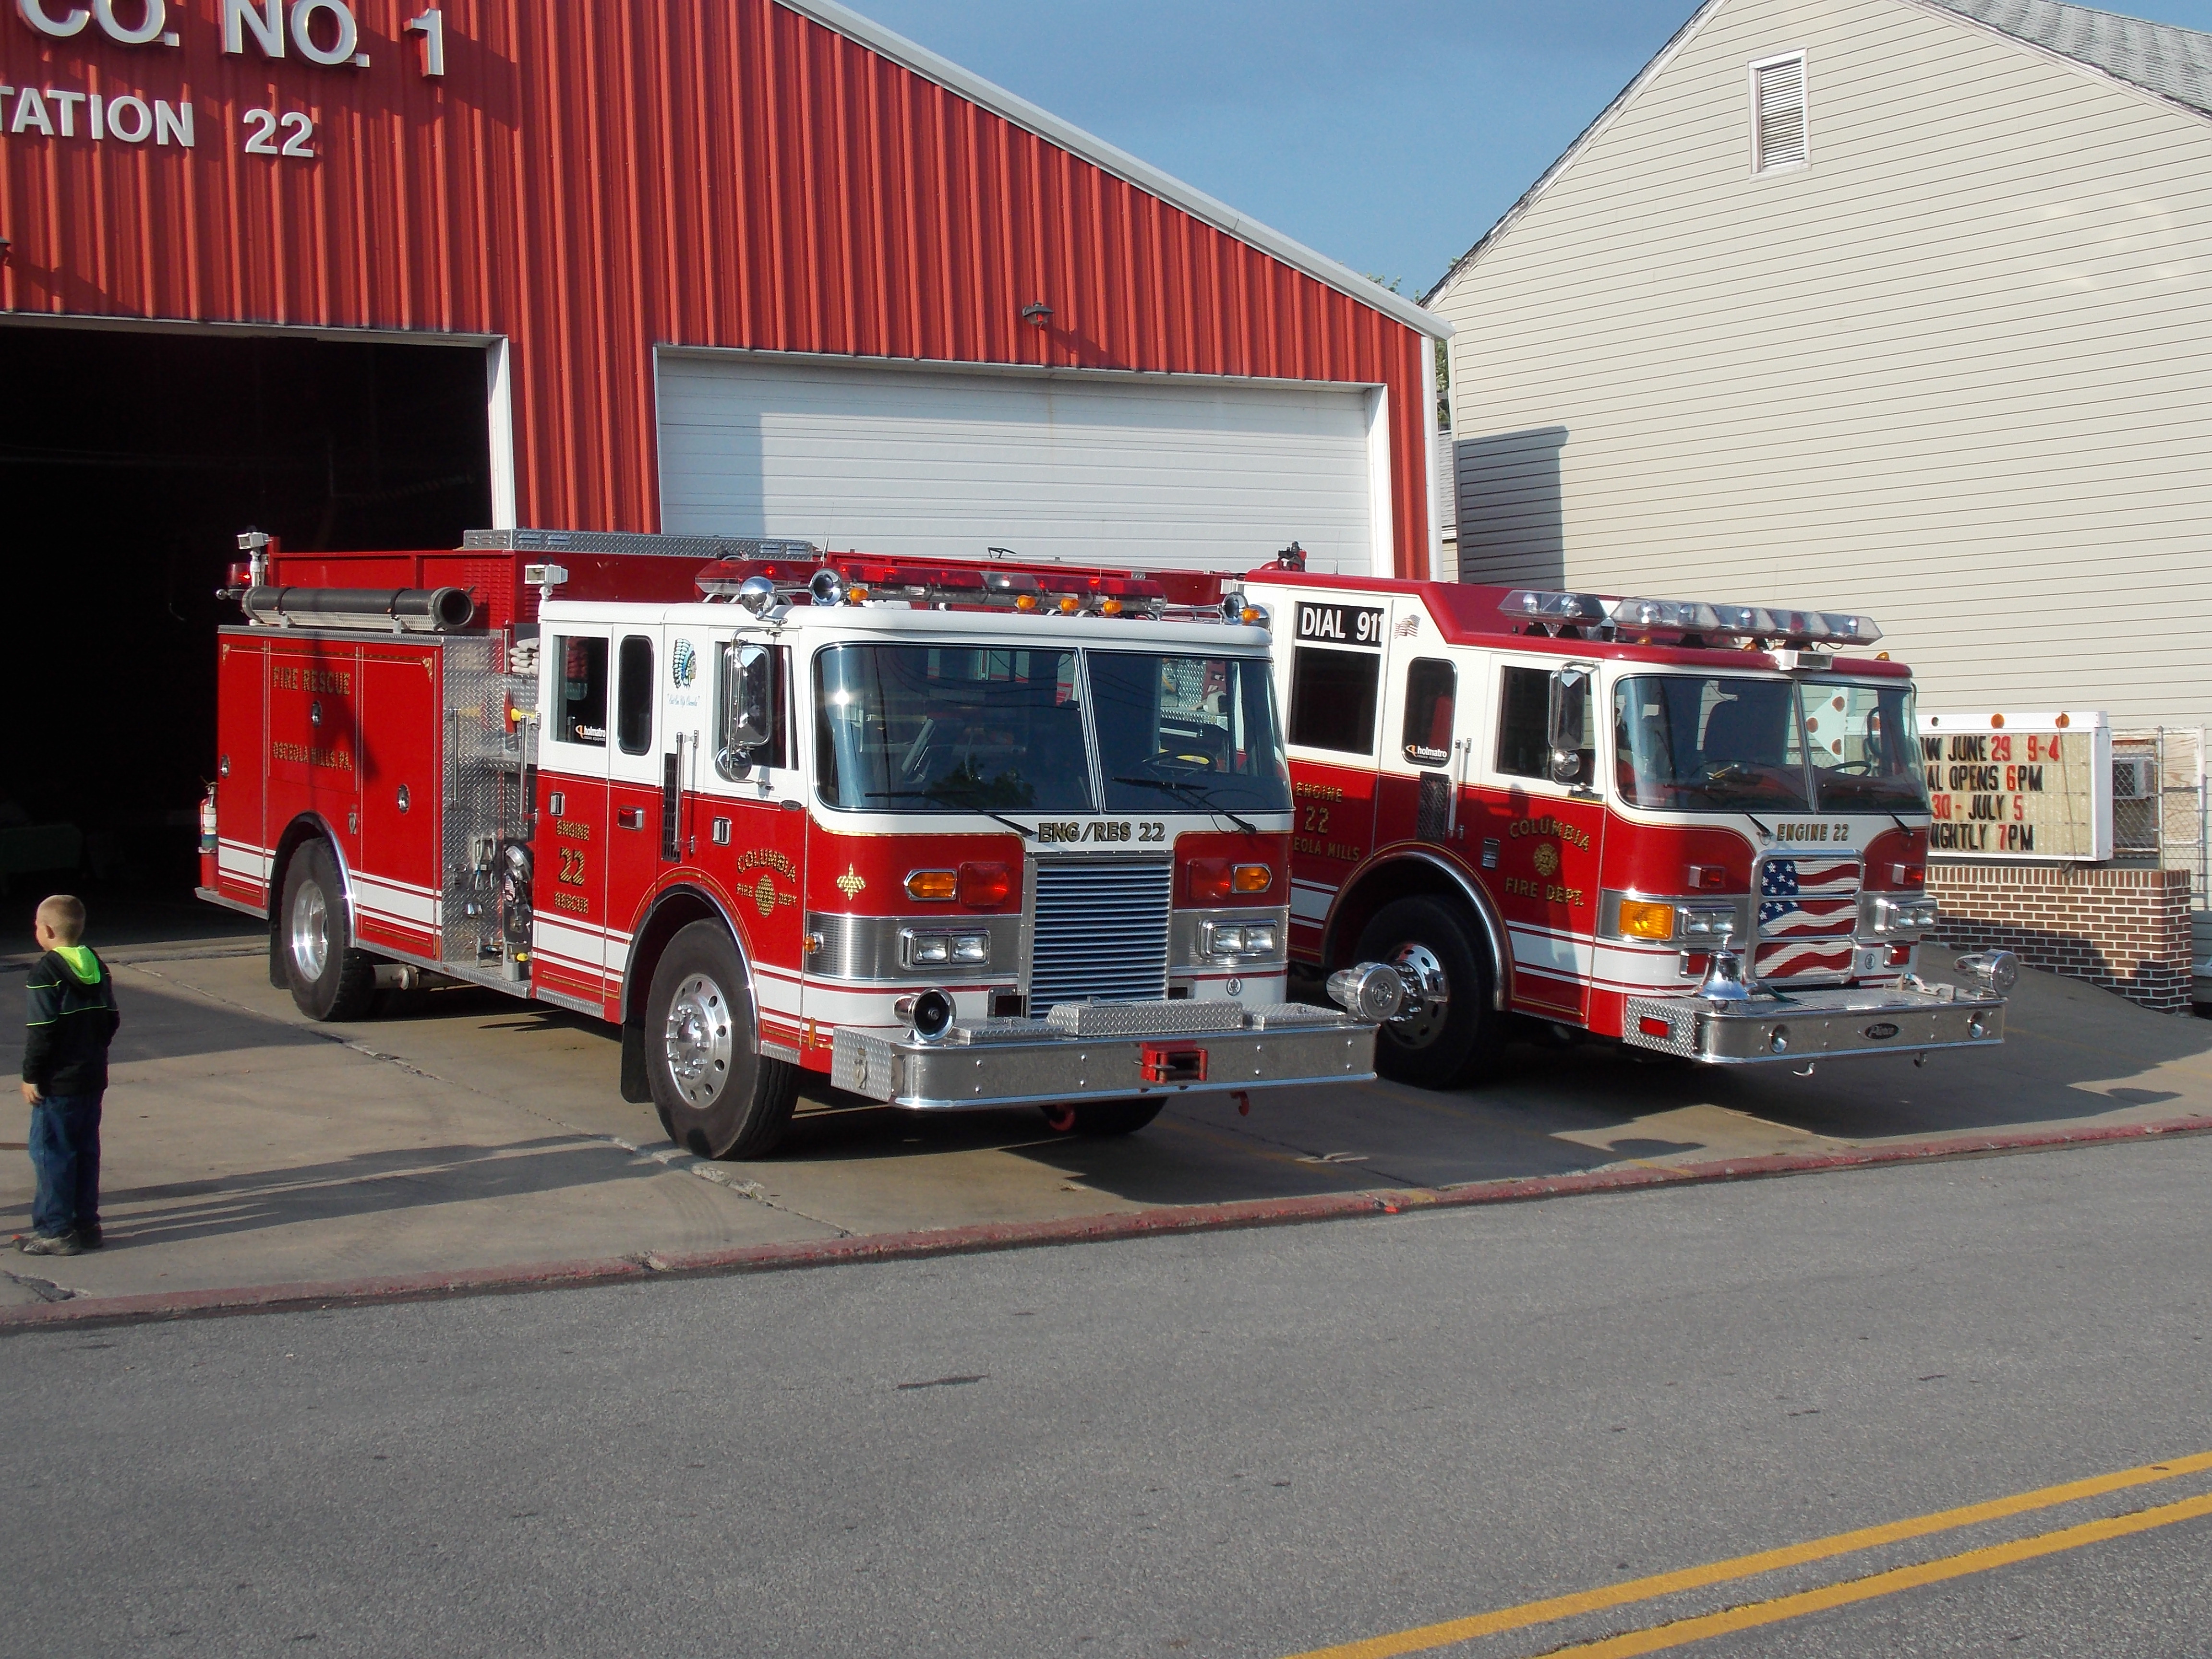 Osceola Mills fire engines are on display at the carnival's entrance. (Photo by Dustin Parks)